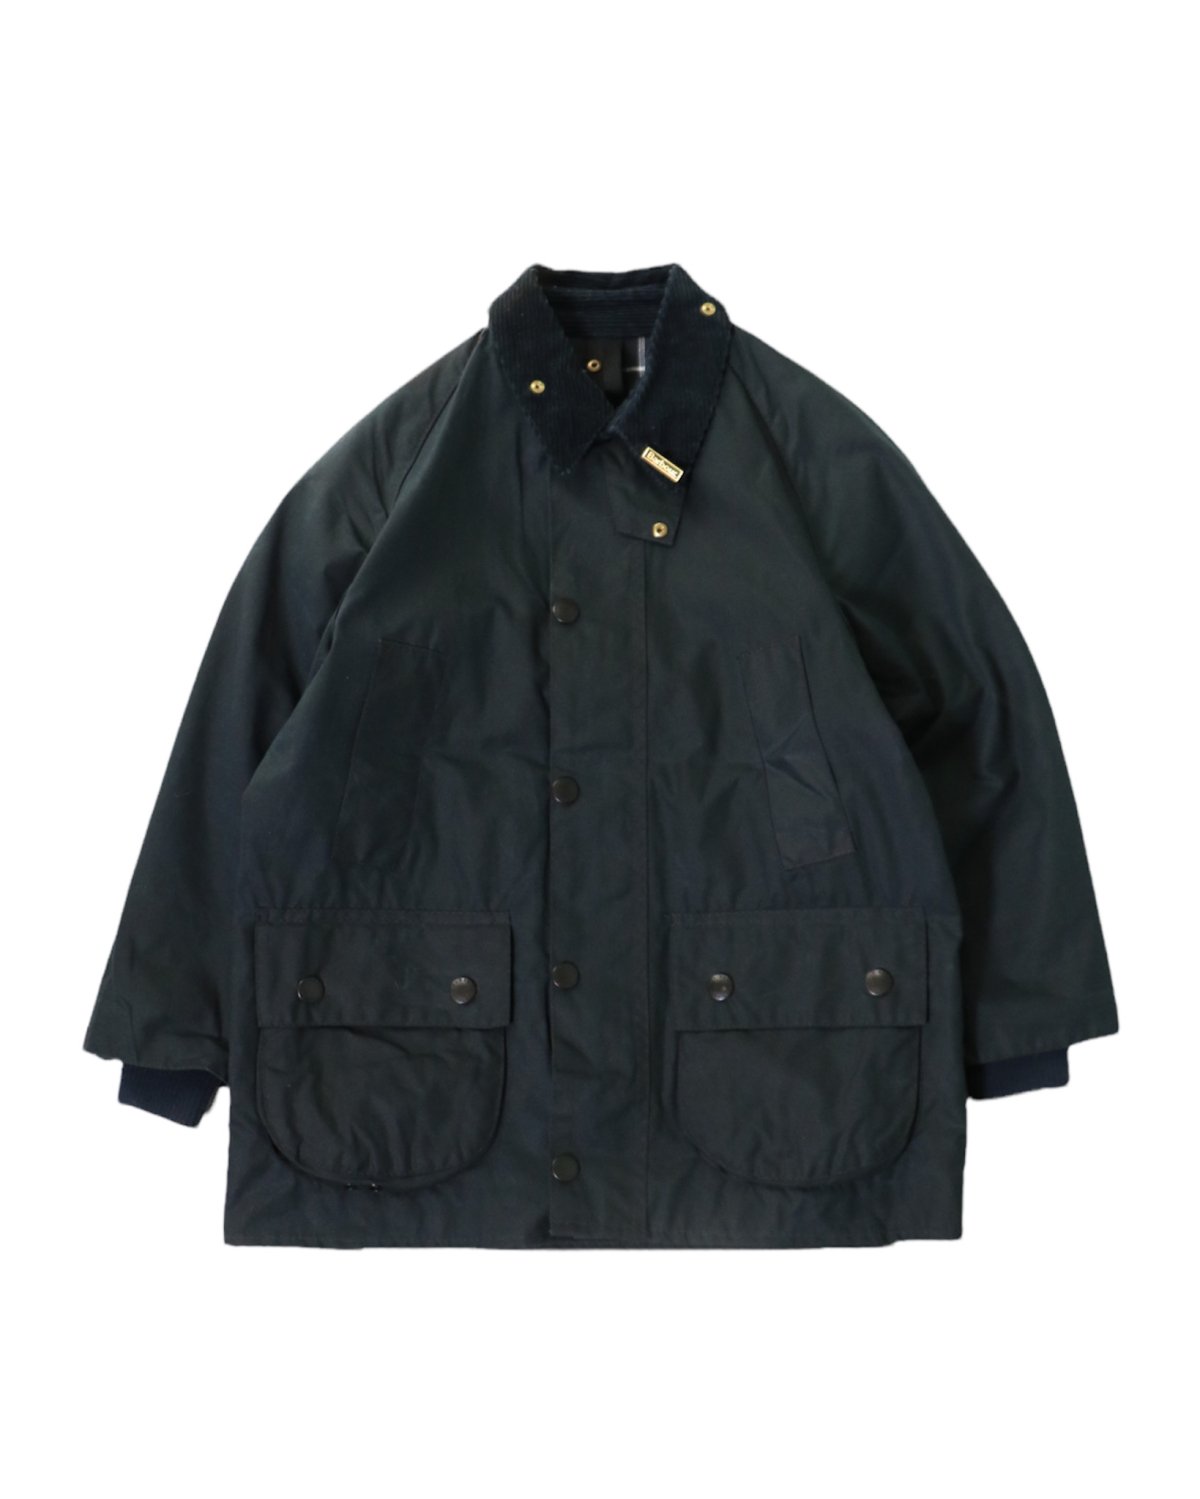 I&I 古着 通販 “Barbour” BEDALE 詳細画像1